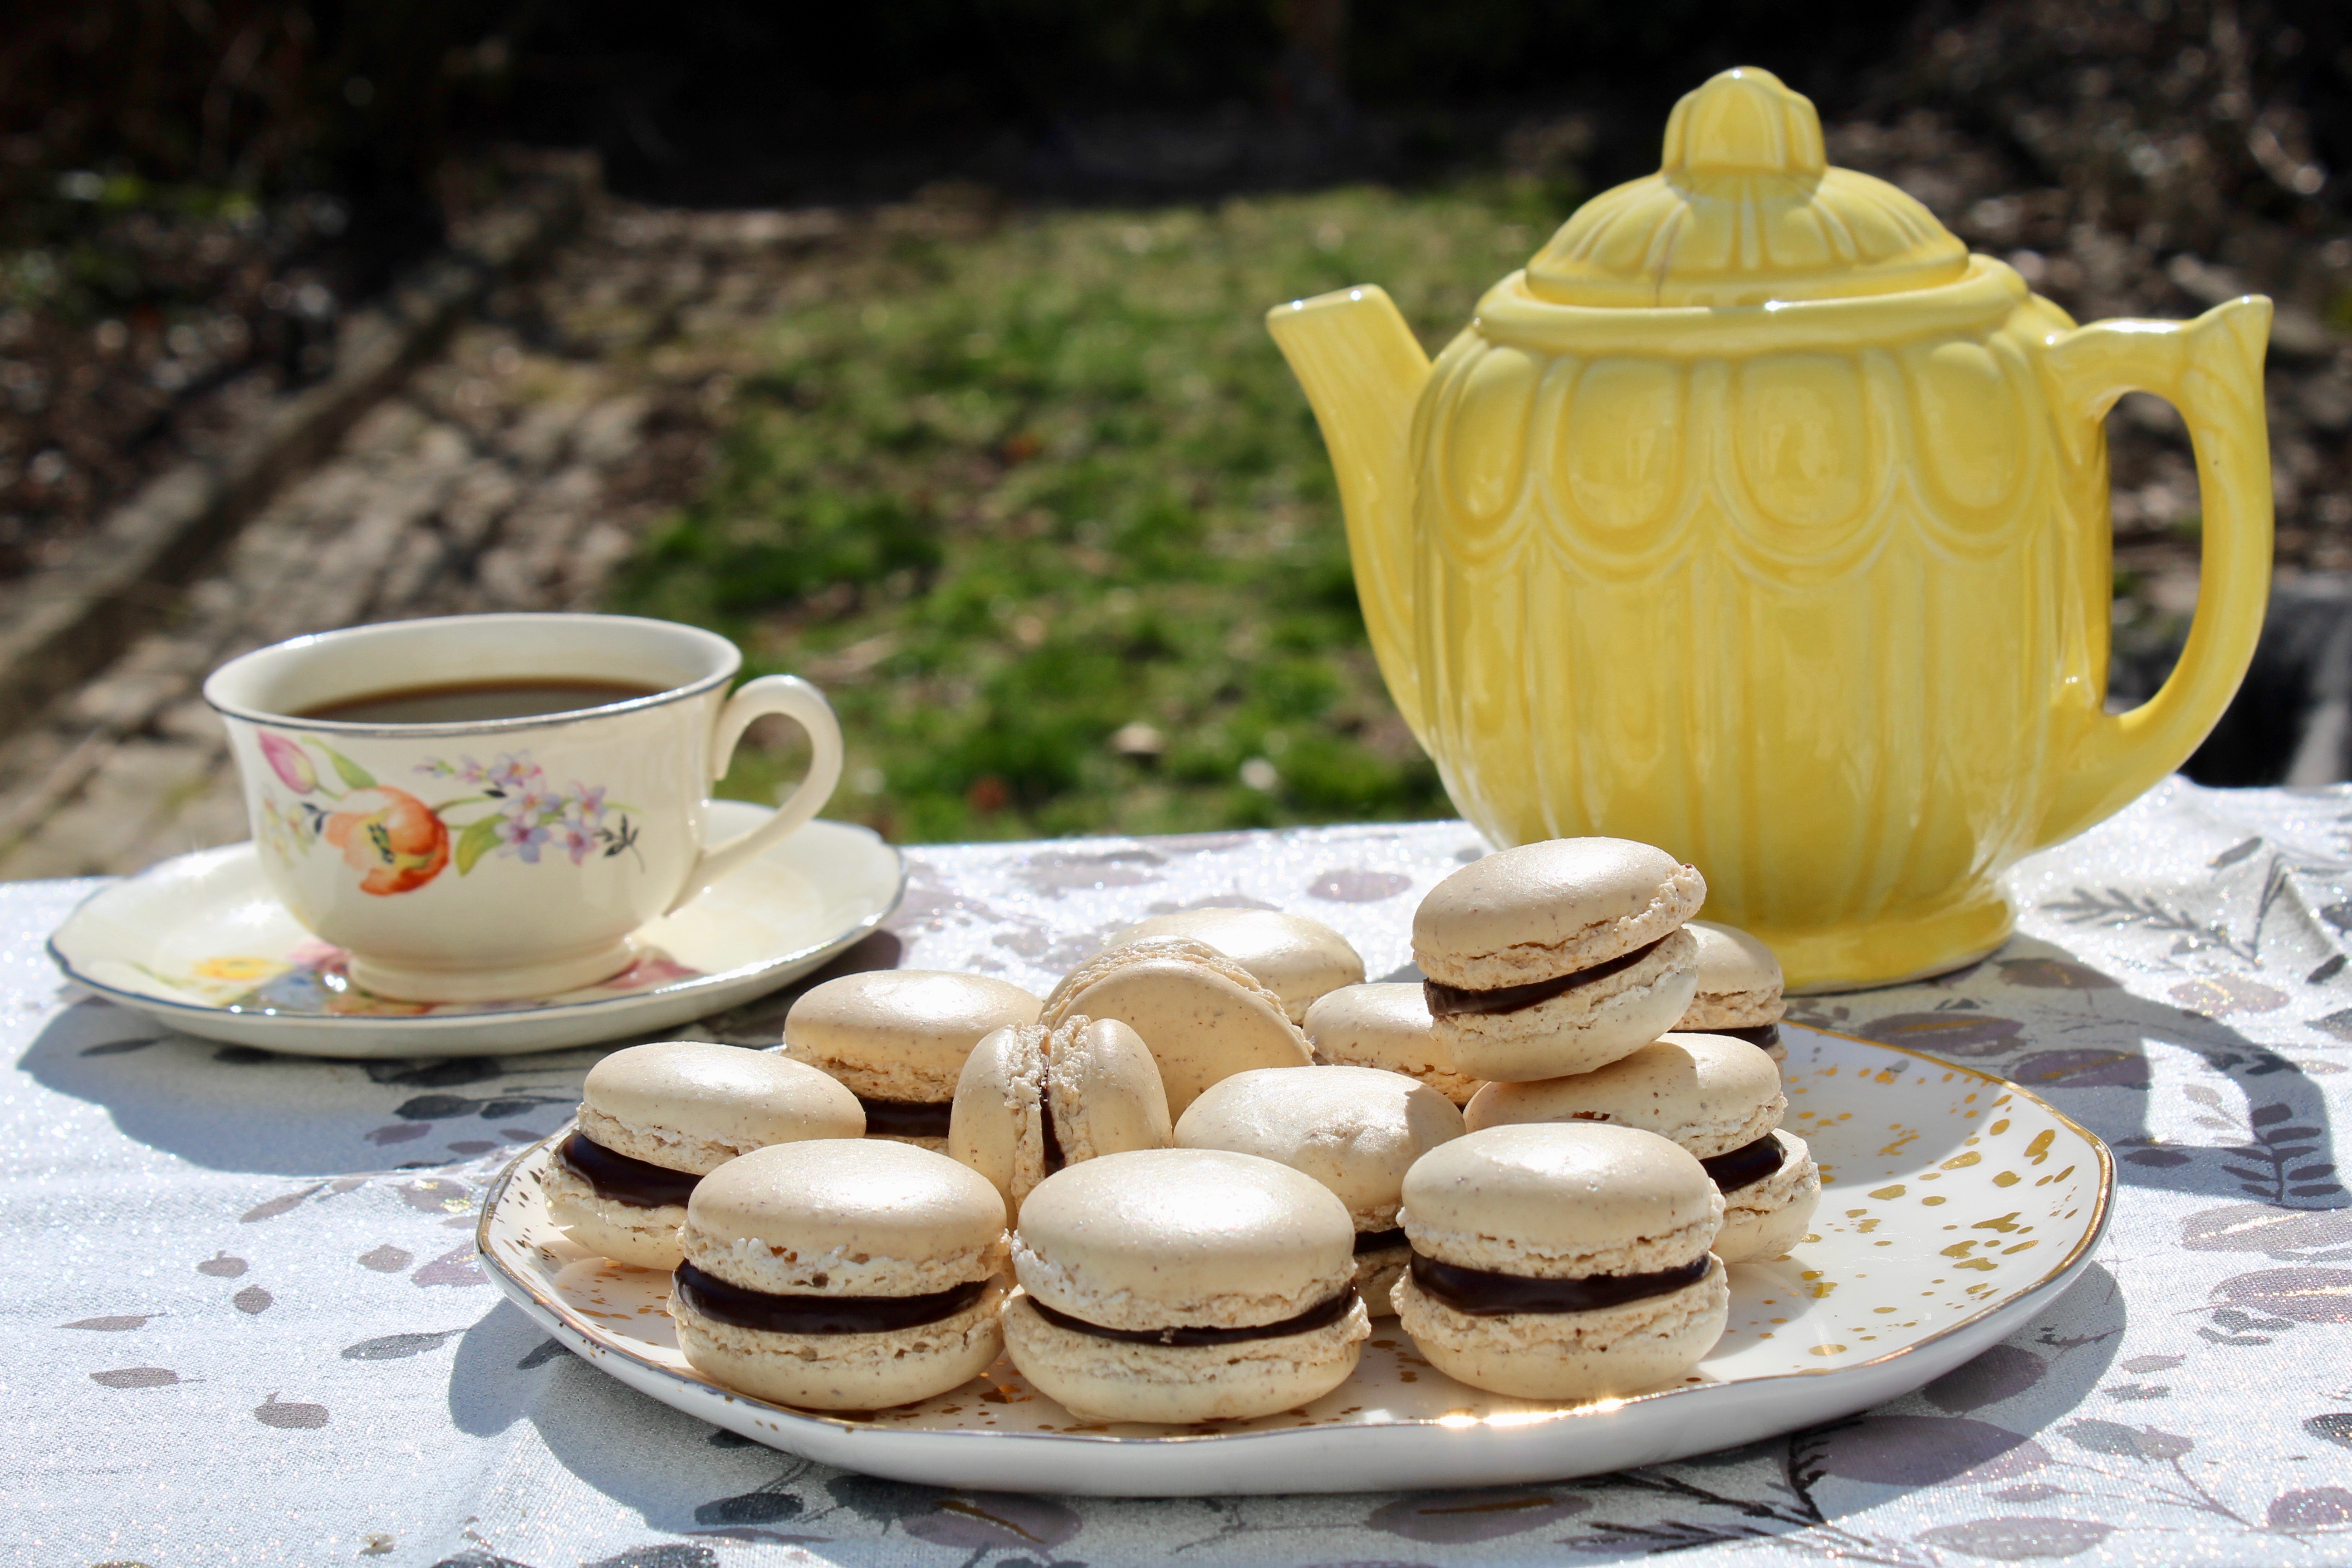 Did you know that macarons taste better 1-2 days after they've been made?